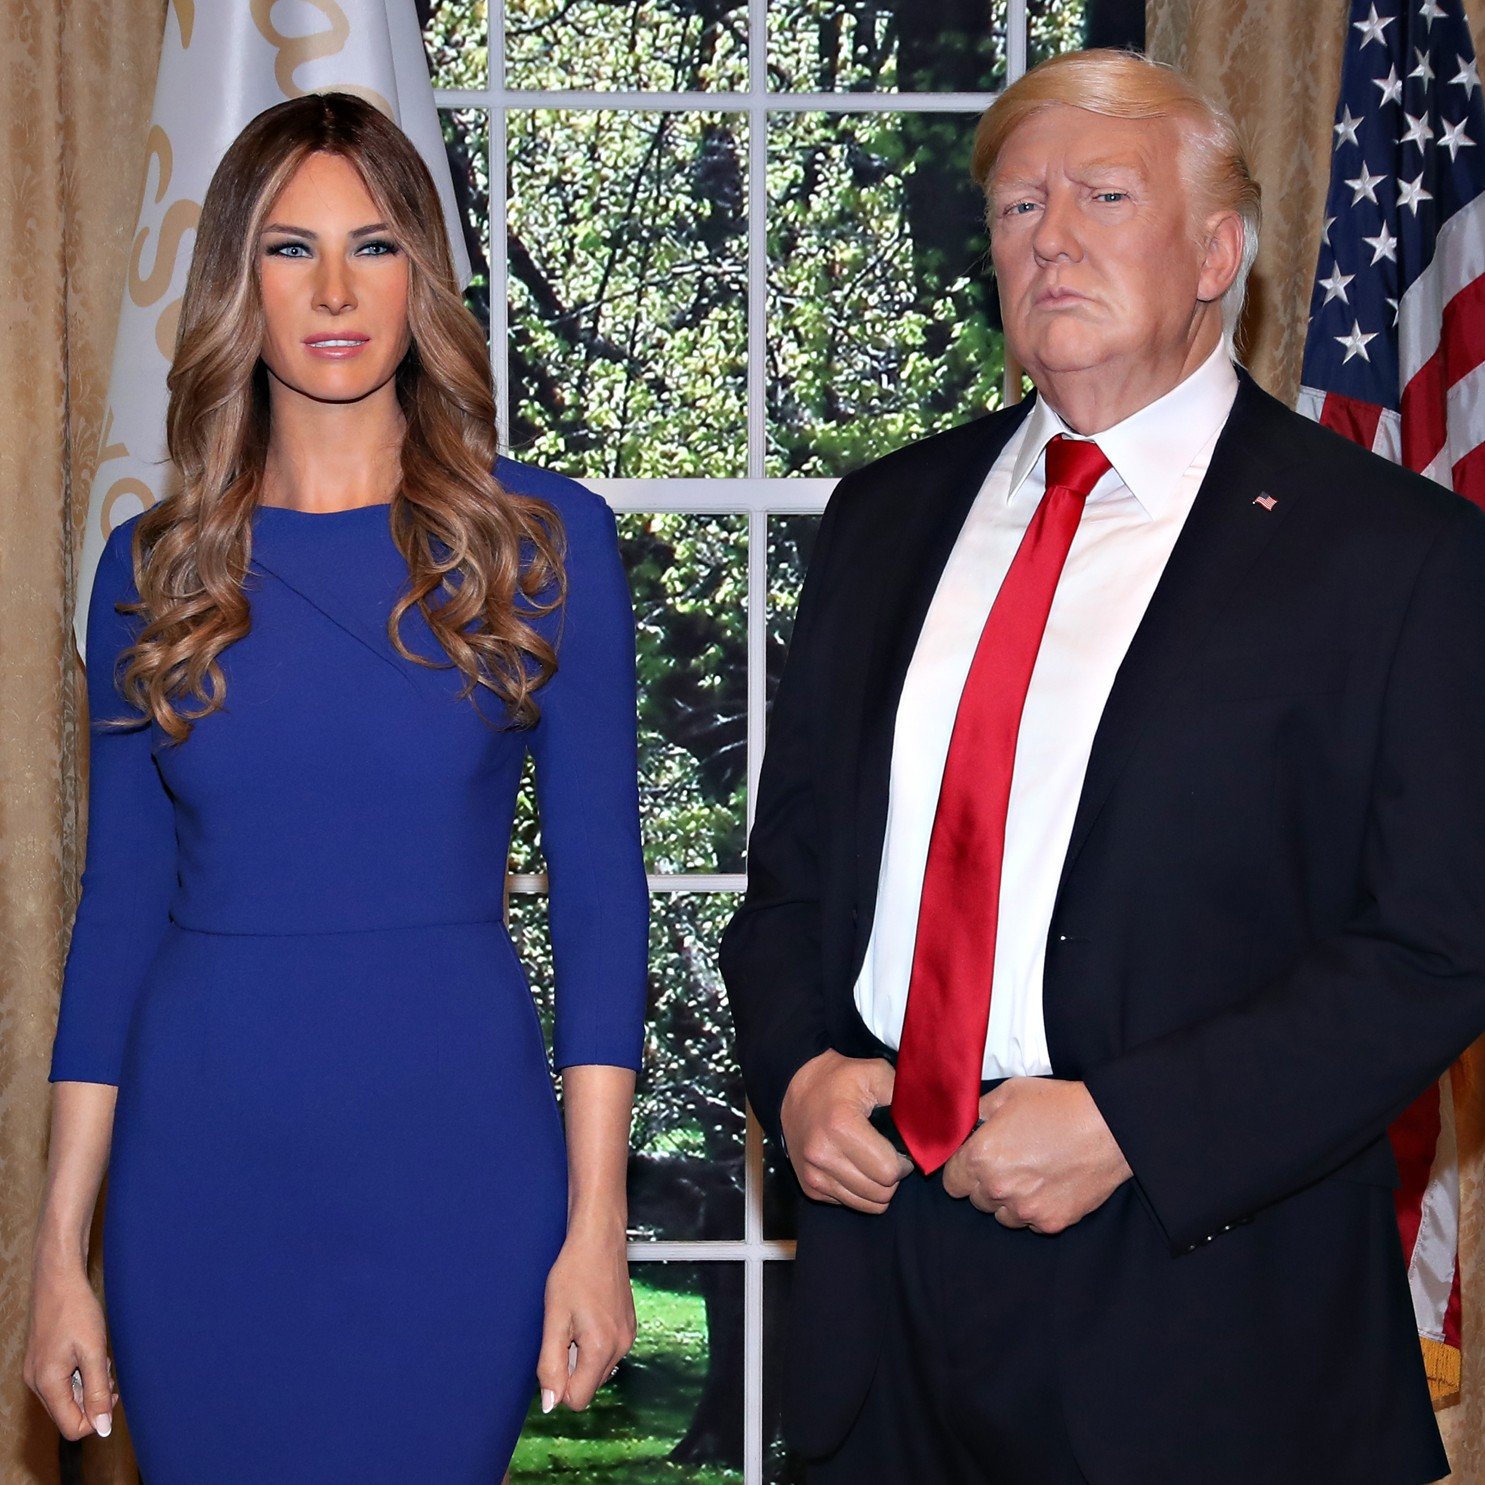 Melania Trump Wax Figure Pictures and Twitter Reactions | POPSUGAR News